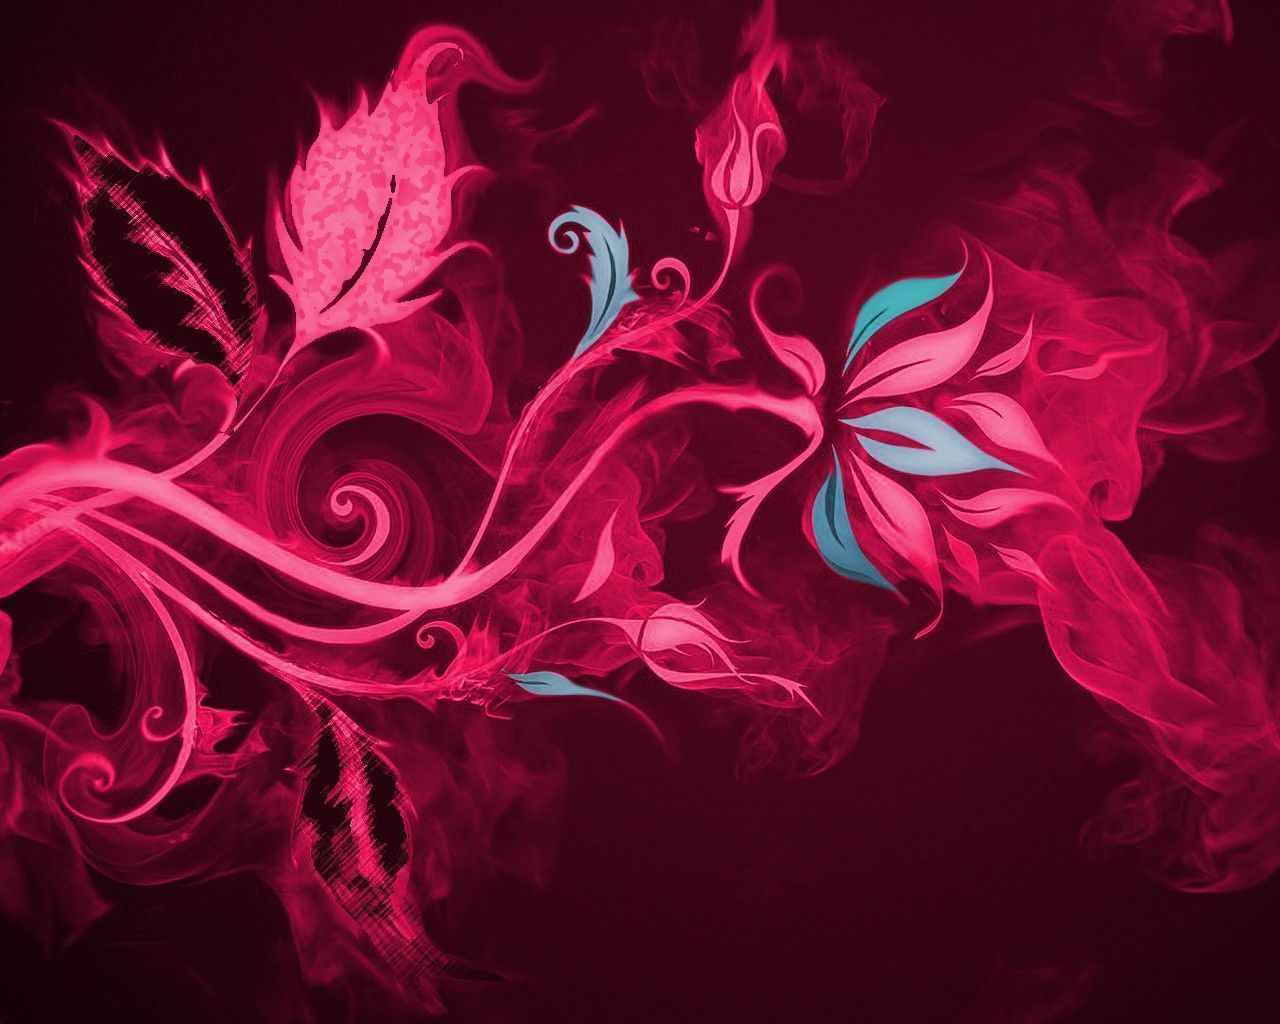 Pink Flame Wallpaper And Image .wallpaper House.com